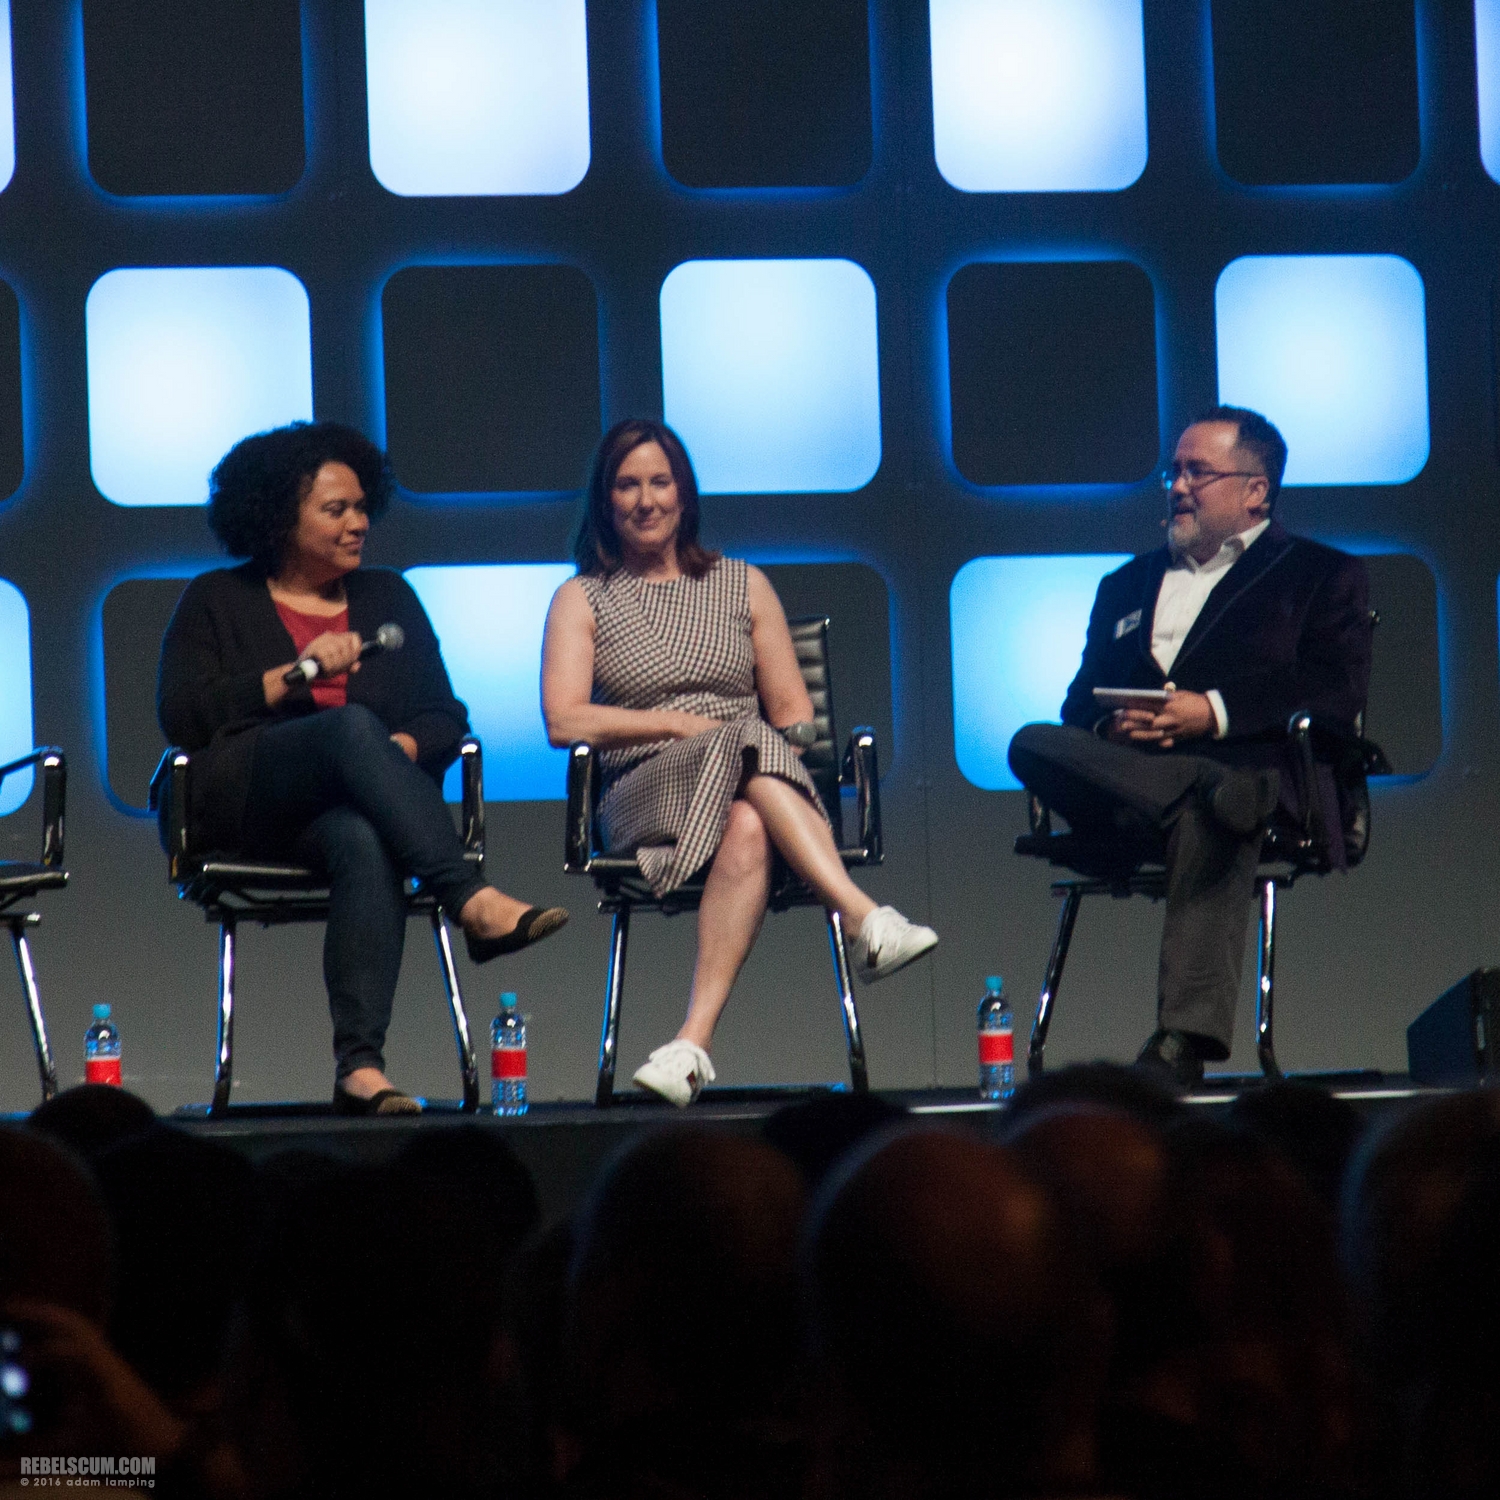 star-wars-celebration-2016-future-filmmakers-and-closing-ceremony-002.jpg